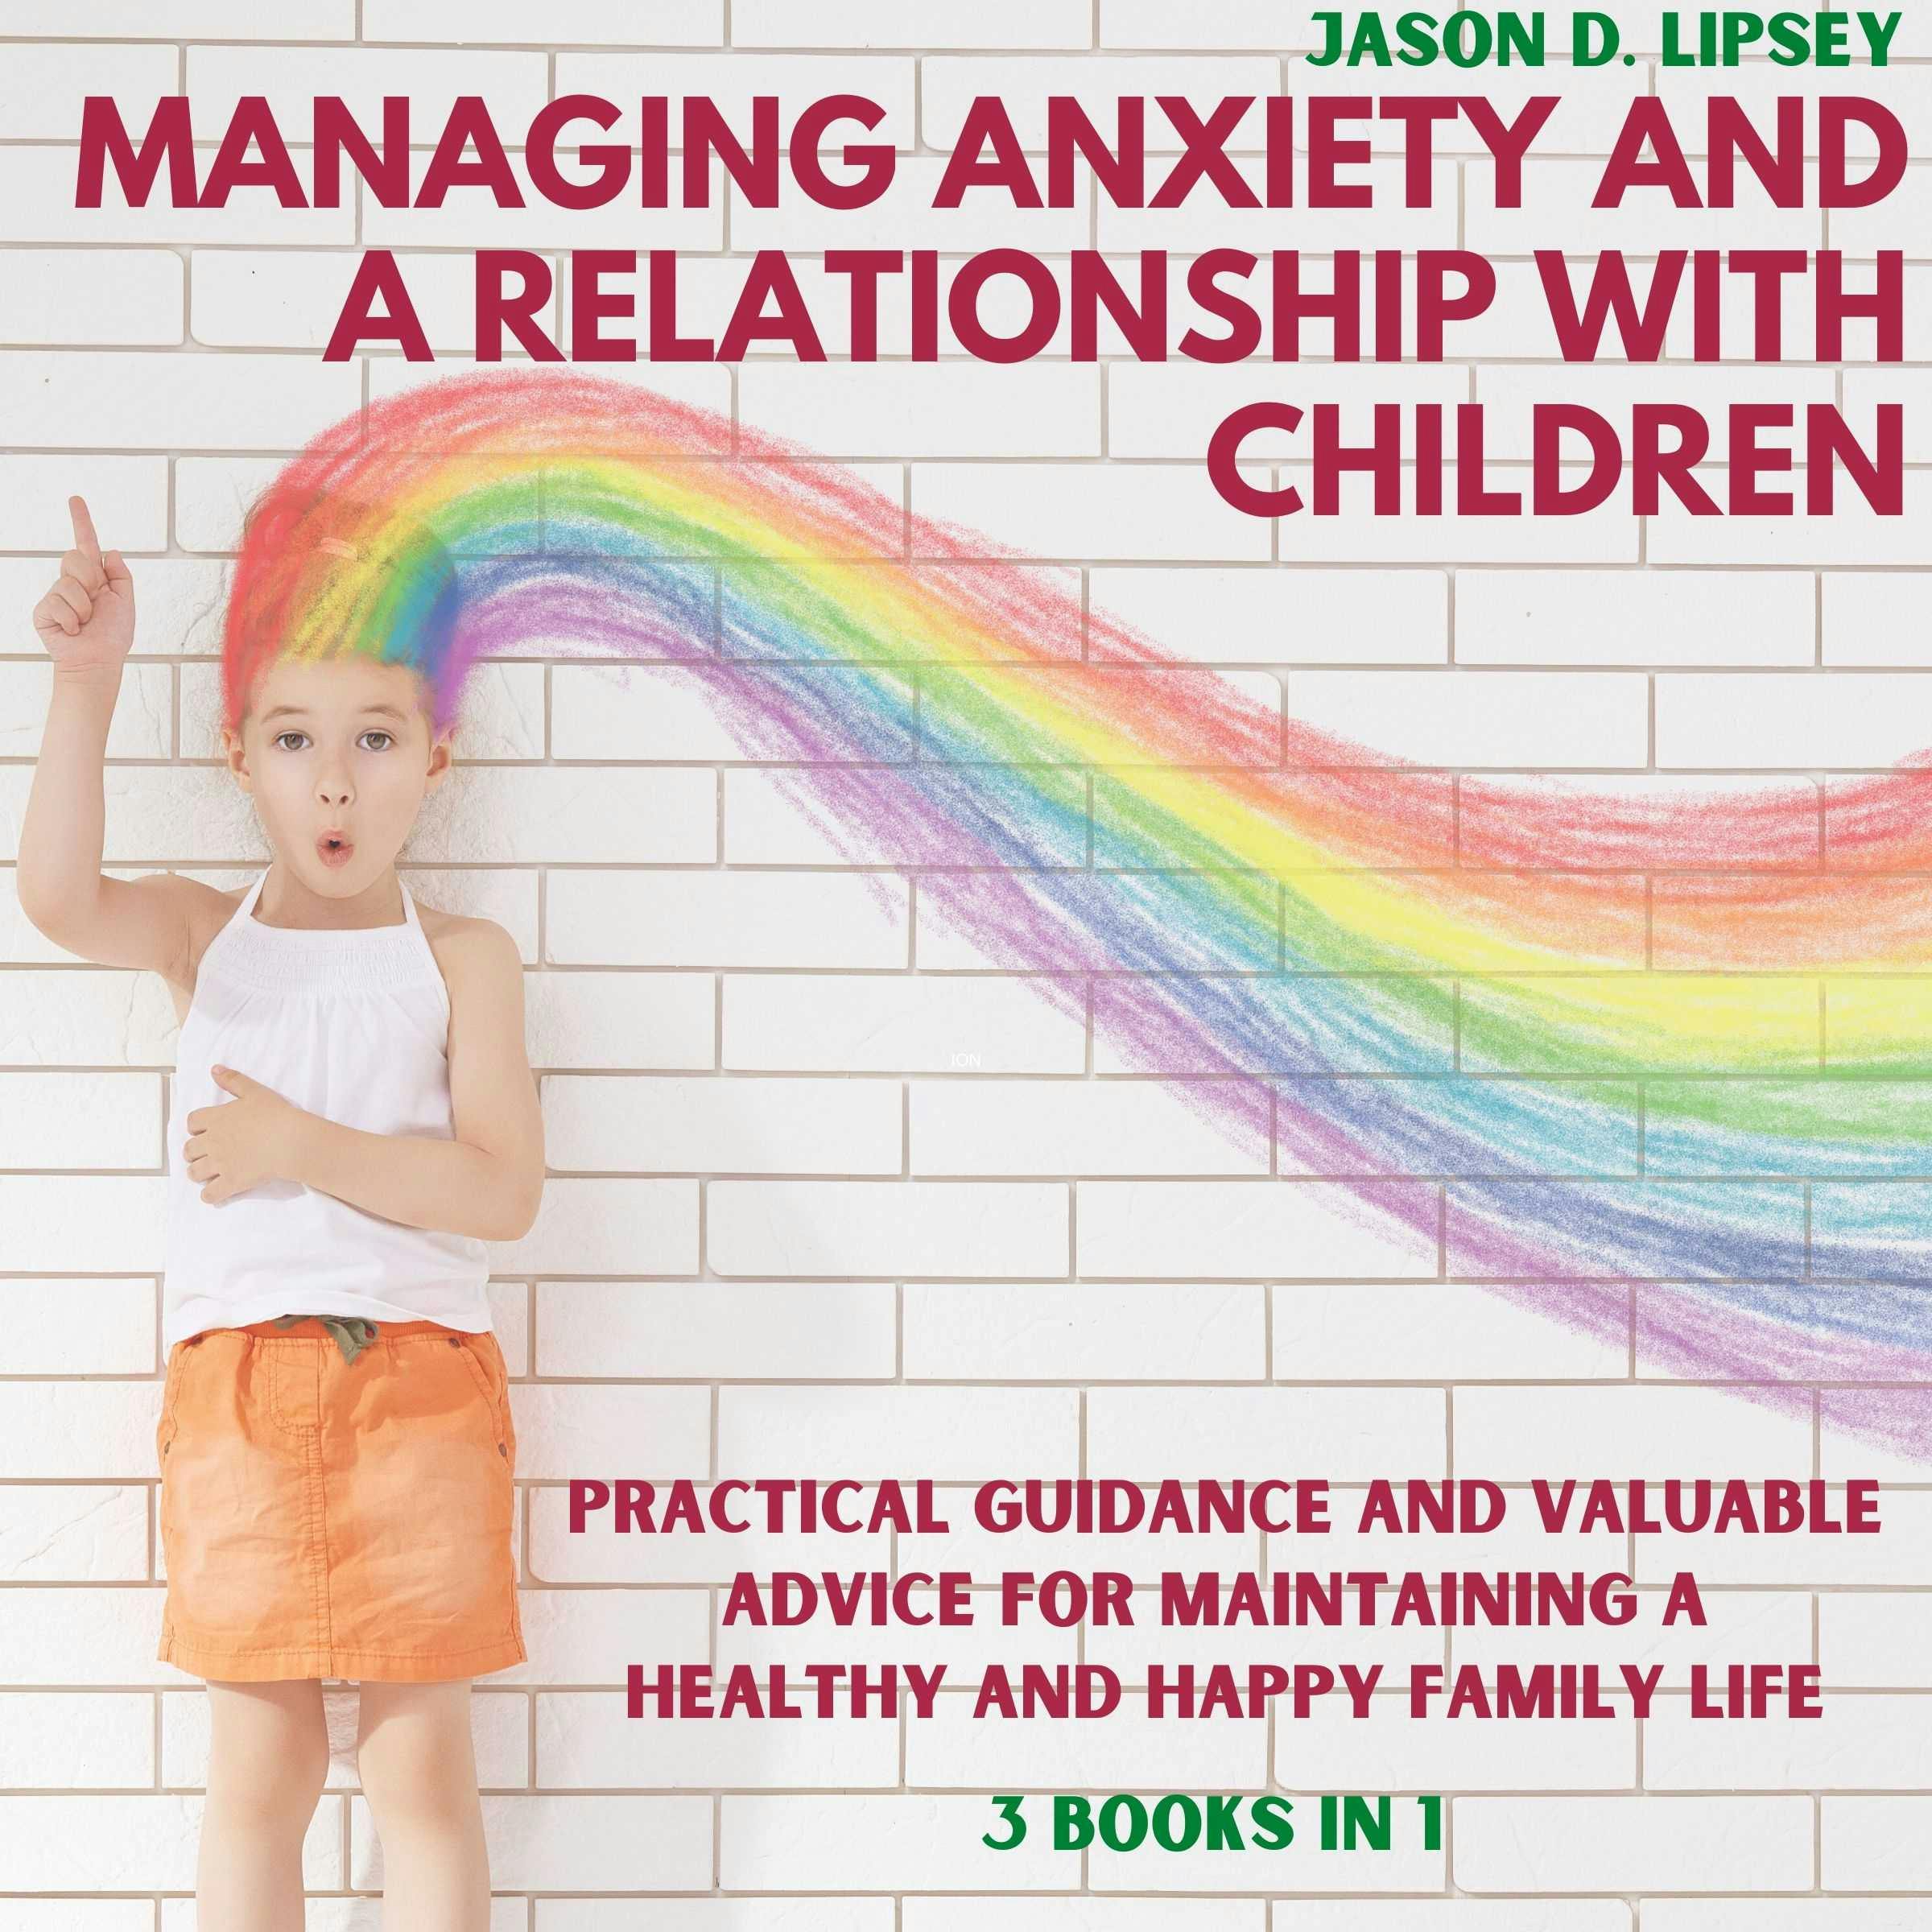 Managing Anxiety and a Relationship with Children: Practical Guidance and Valuable Advice for Maintaining a Healthy and Happy Family Life - Jason D. lipsey